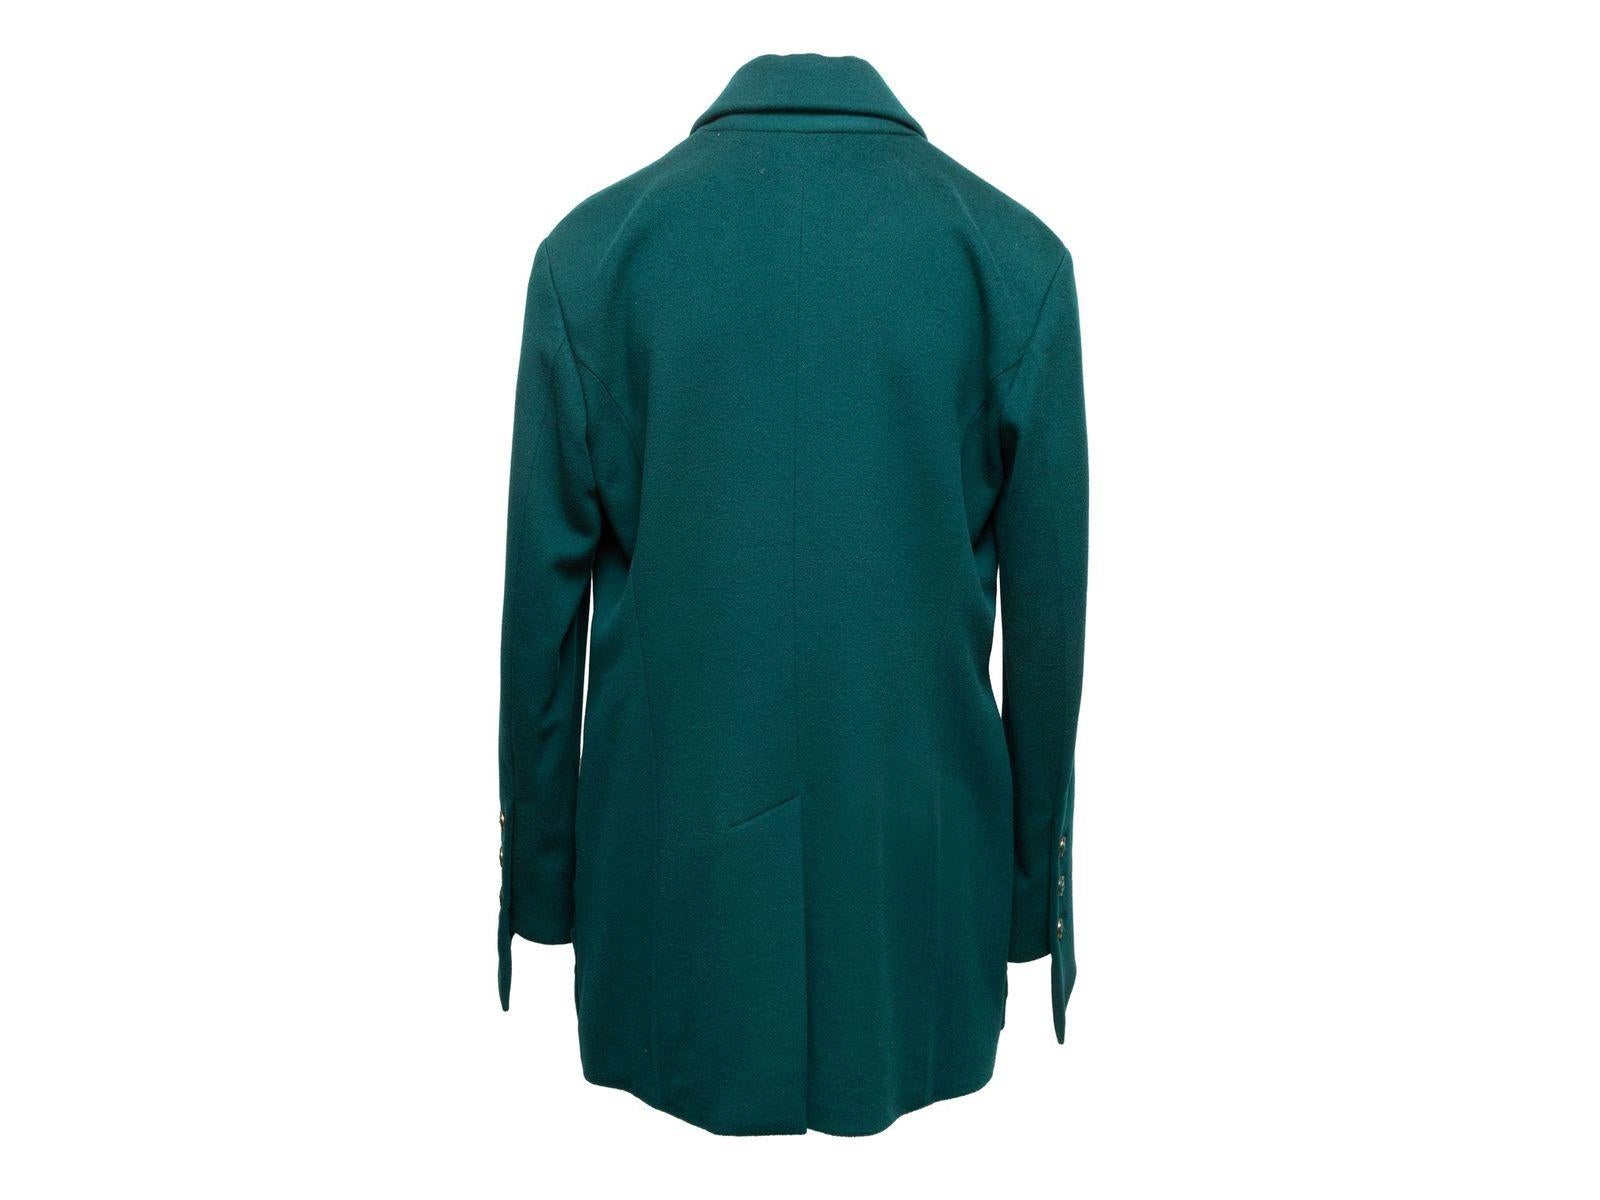 Karl Lagerfeld Teal Double-Breasted Wool Coat 2